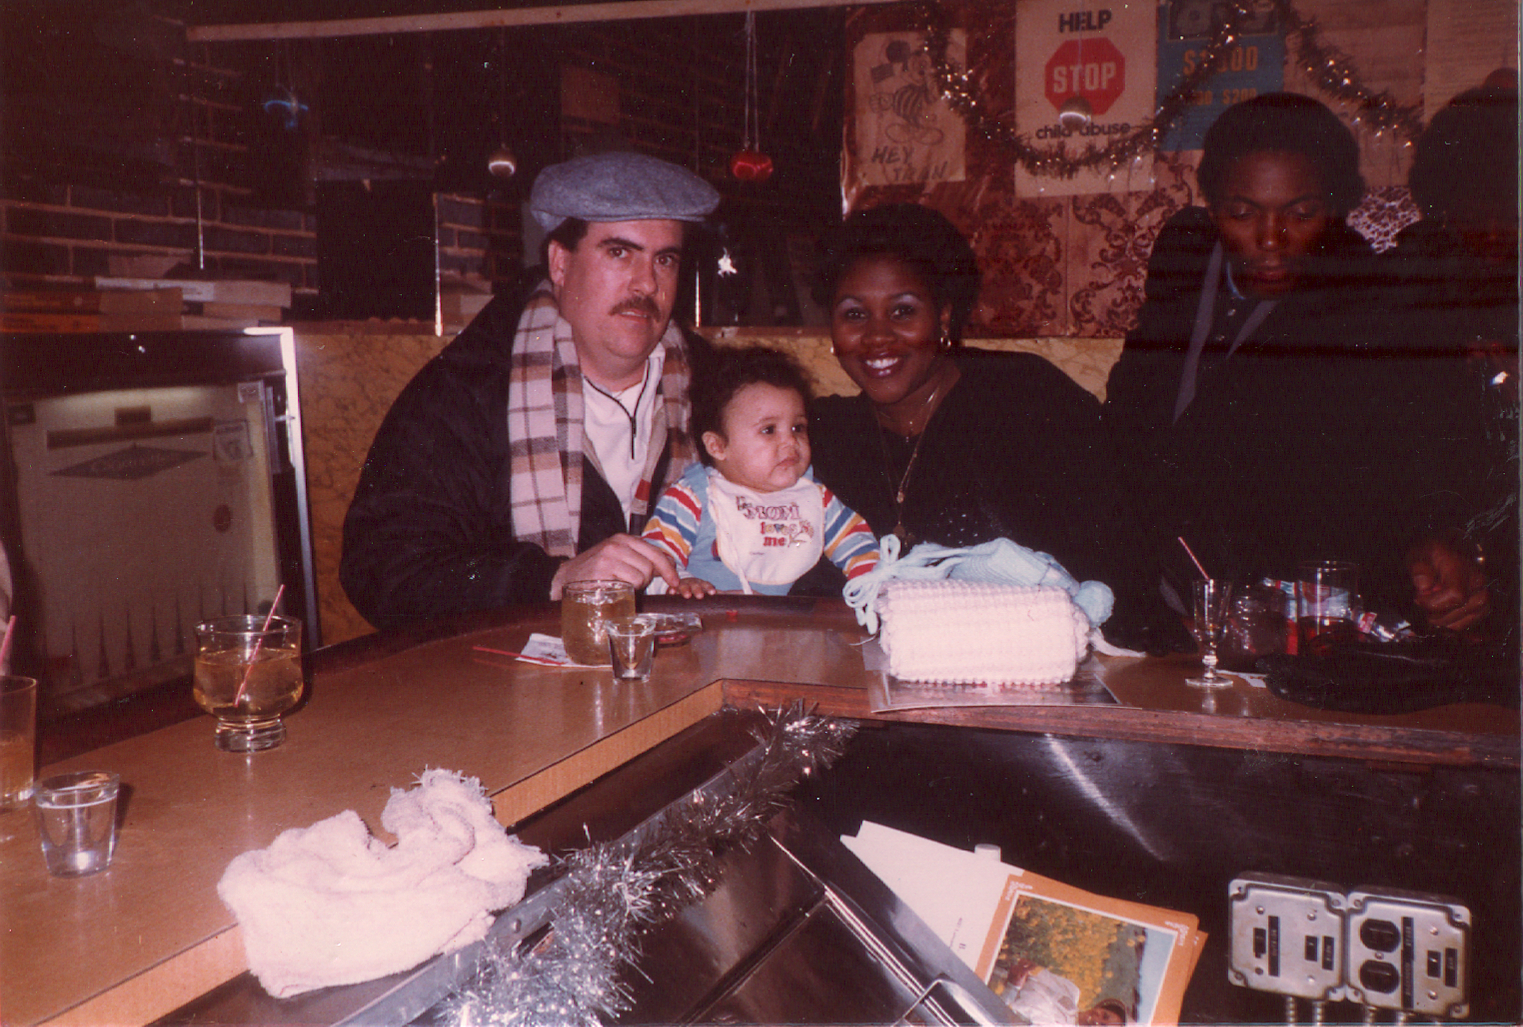 An infant with their mother & father at a bar because that's how parents rolled in the early '80s.